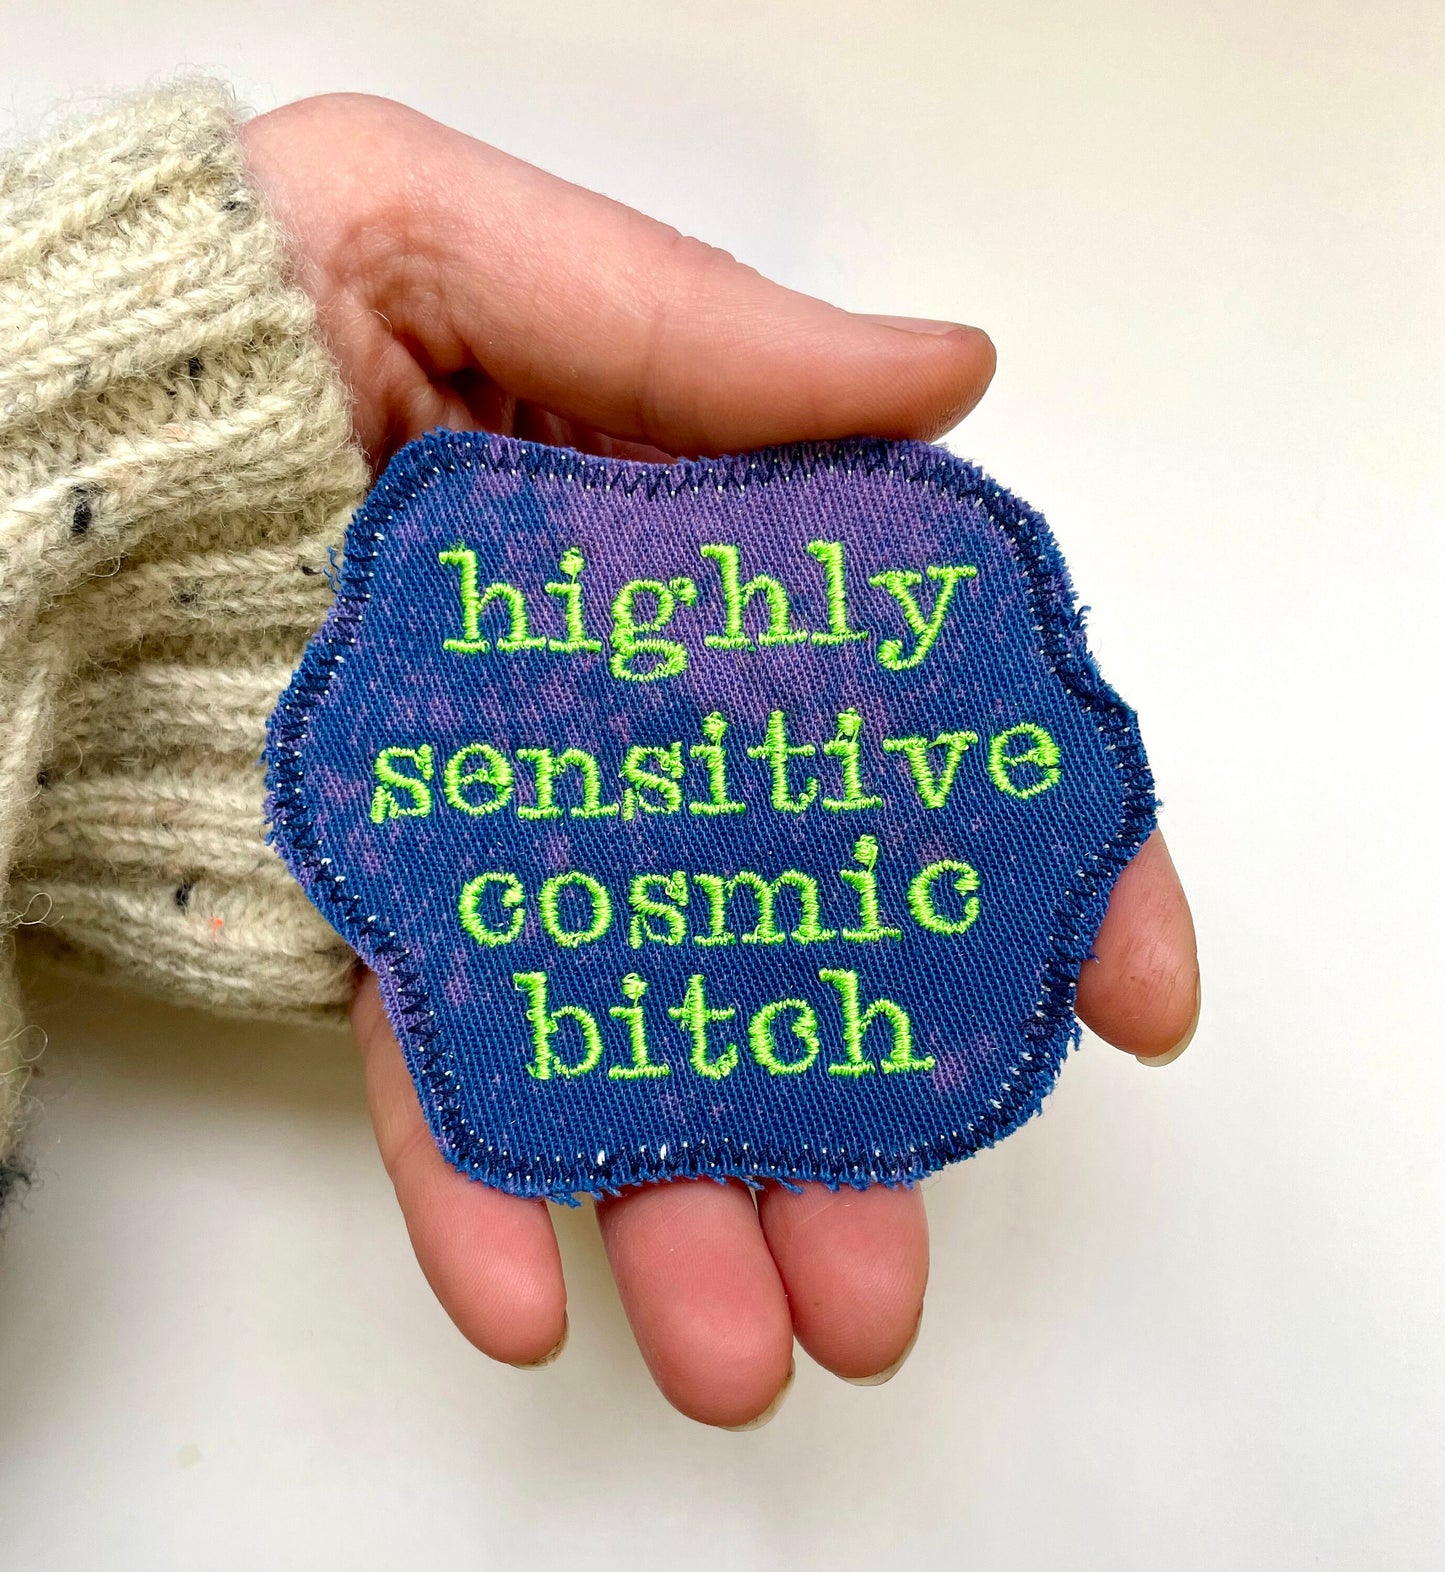 a hand holding a patch that says highly seductive cosmic bitch